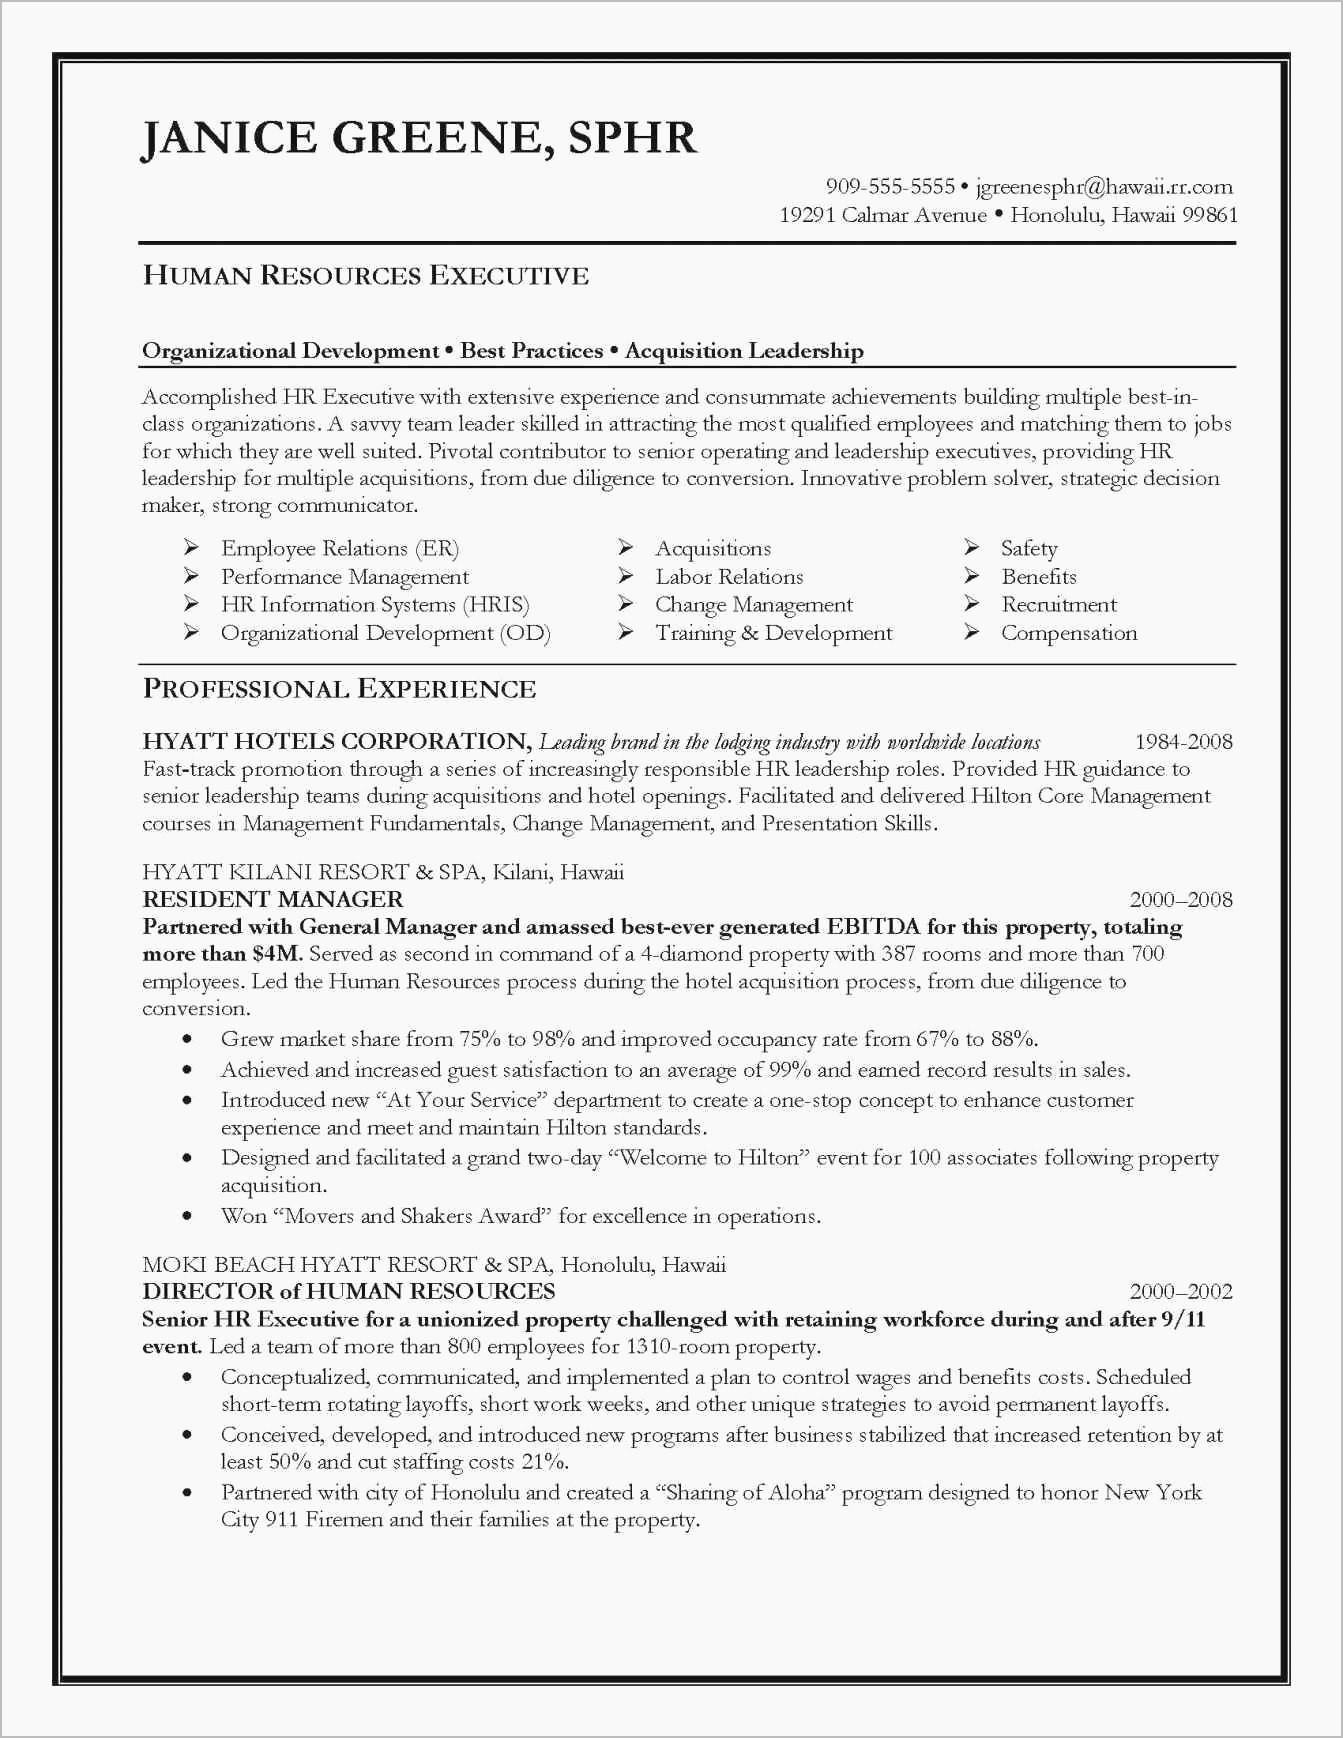 Resume Words To Use Dragon Resume Review Lovely Strong Resume Words Useful 19 New Good